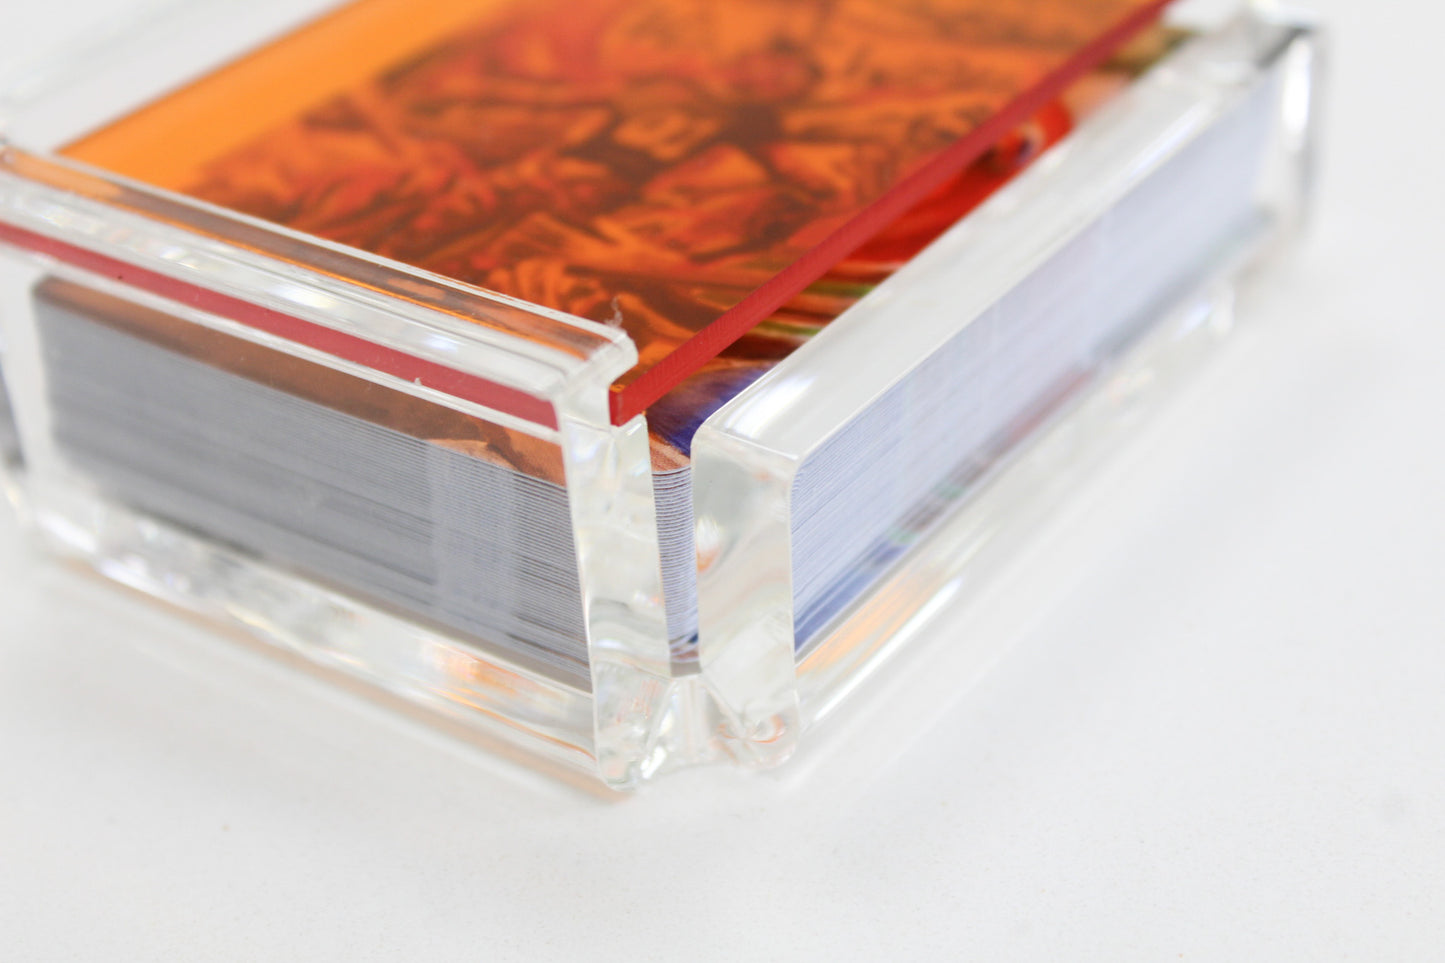 Orange acrylic playing card case from FOSTER